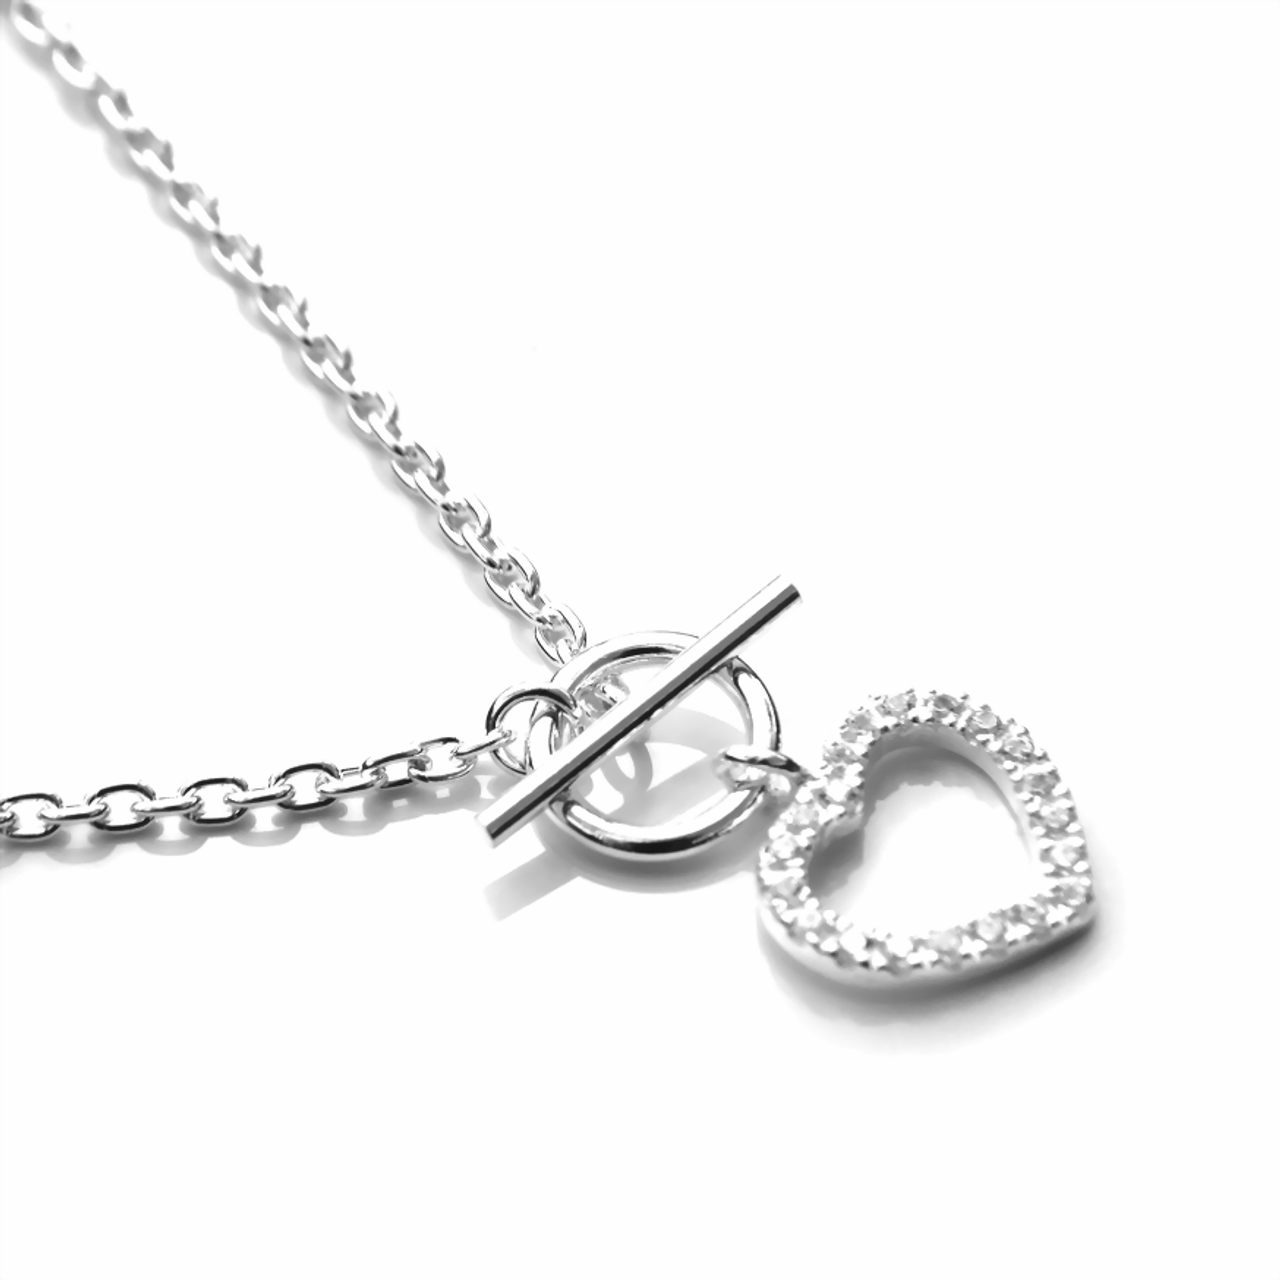 925 Sterling Silver Pink Swirl Heart Family Tree Collier Pendant Necklace  With Circle Logo And Rolo Chain For Fashionable Bead Silver Charm Necklace  Jewelry From Loyalchief, $7.44 | DHgate.Com